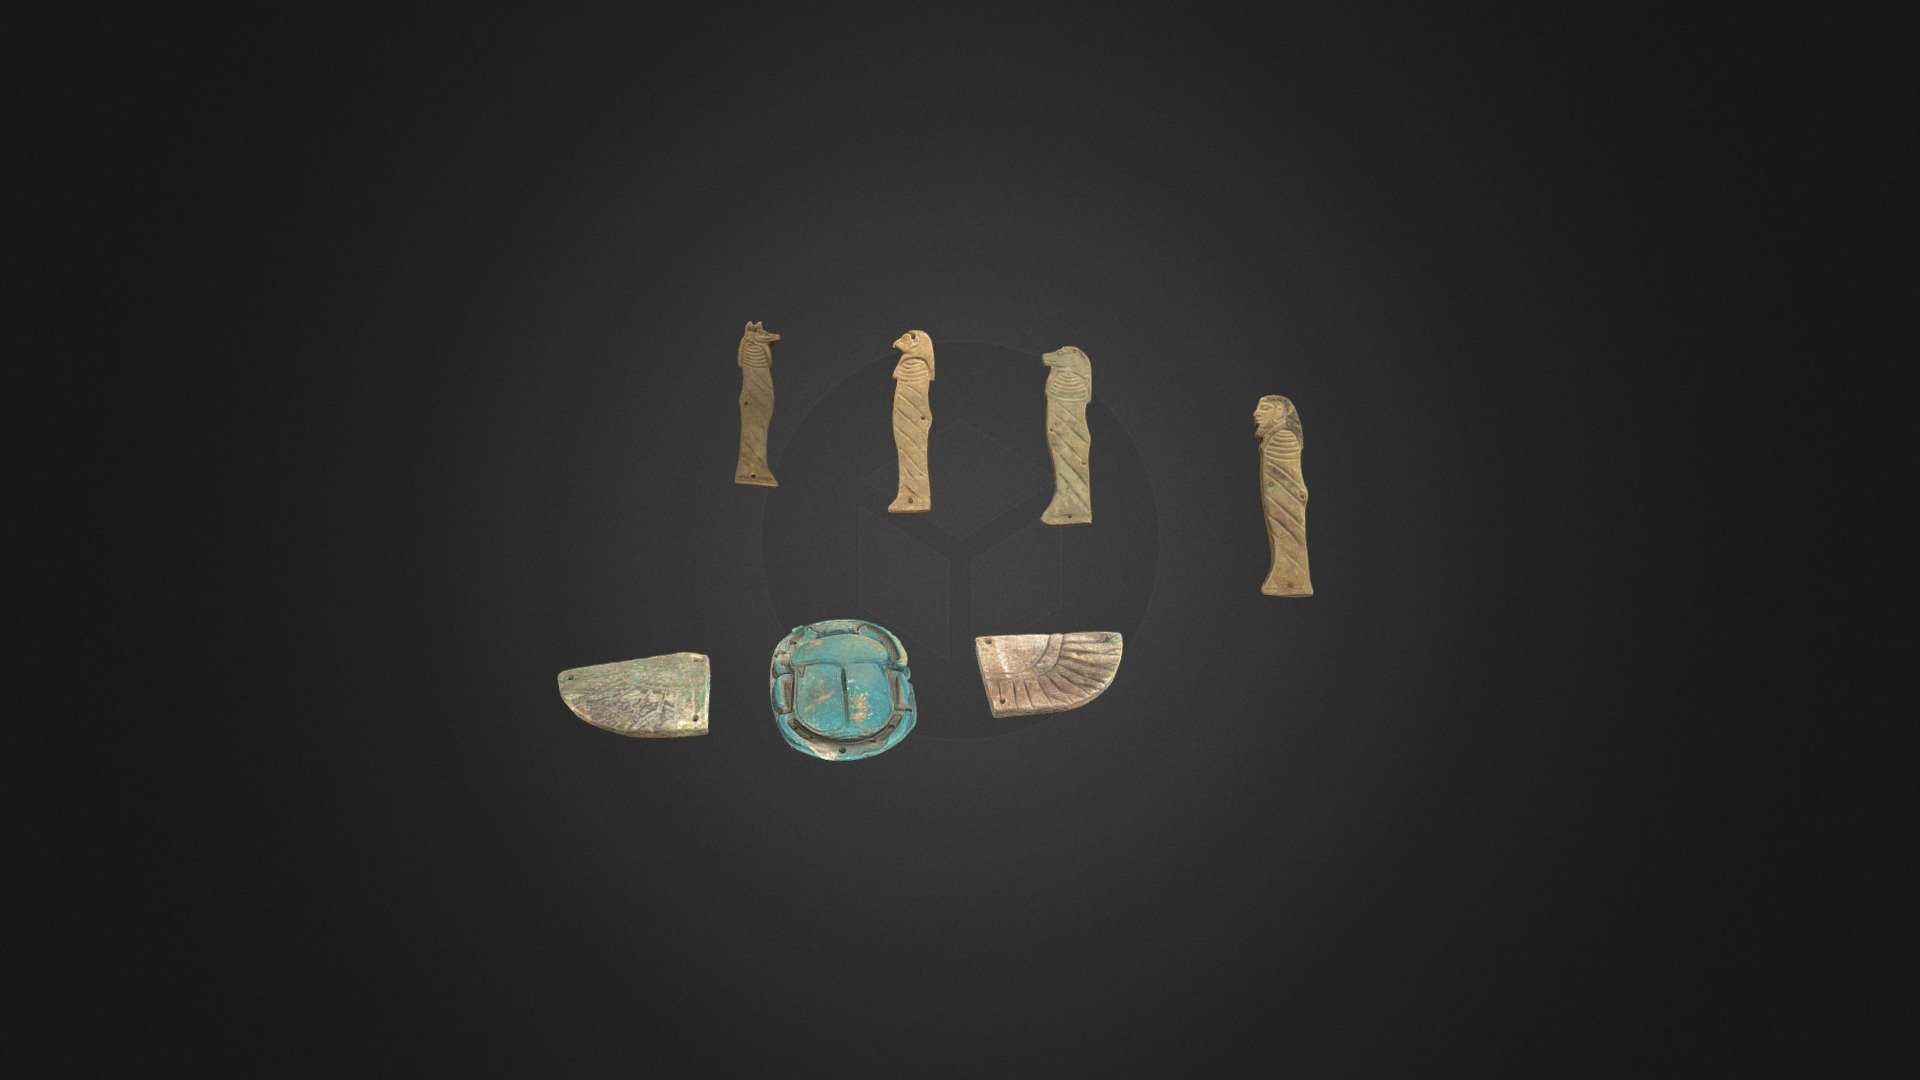 Sons of Horus Amulets: RAFFMA EG.01.008.2021 Third Intermediate Period (ca. 1070-945 BCE). faience. 8 cm tall. Ex collection Harer, gift in 2021

https://www.csusb.edu/raffma/art/detail?objectId=1394071&amp;size=0

Winged Scarab Pectoral: RAFFMA, EL.01.150.1996 Third Intermediate Period (ca. 1070-945 BCE) faience 18 cm wing to wing 7.5 cm tall On loan Harer Family Trust Collection.

3D Model, Authors: Bryan Kraemer, Zina Verduzco Photographs: Canon EOS 80D Software: Agisoft Metashape - Scarab Pectoral and Sons of Horus (RAFFMA) - 3D model by raffmacsusb 3d model